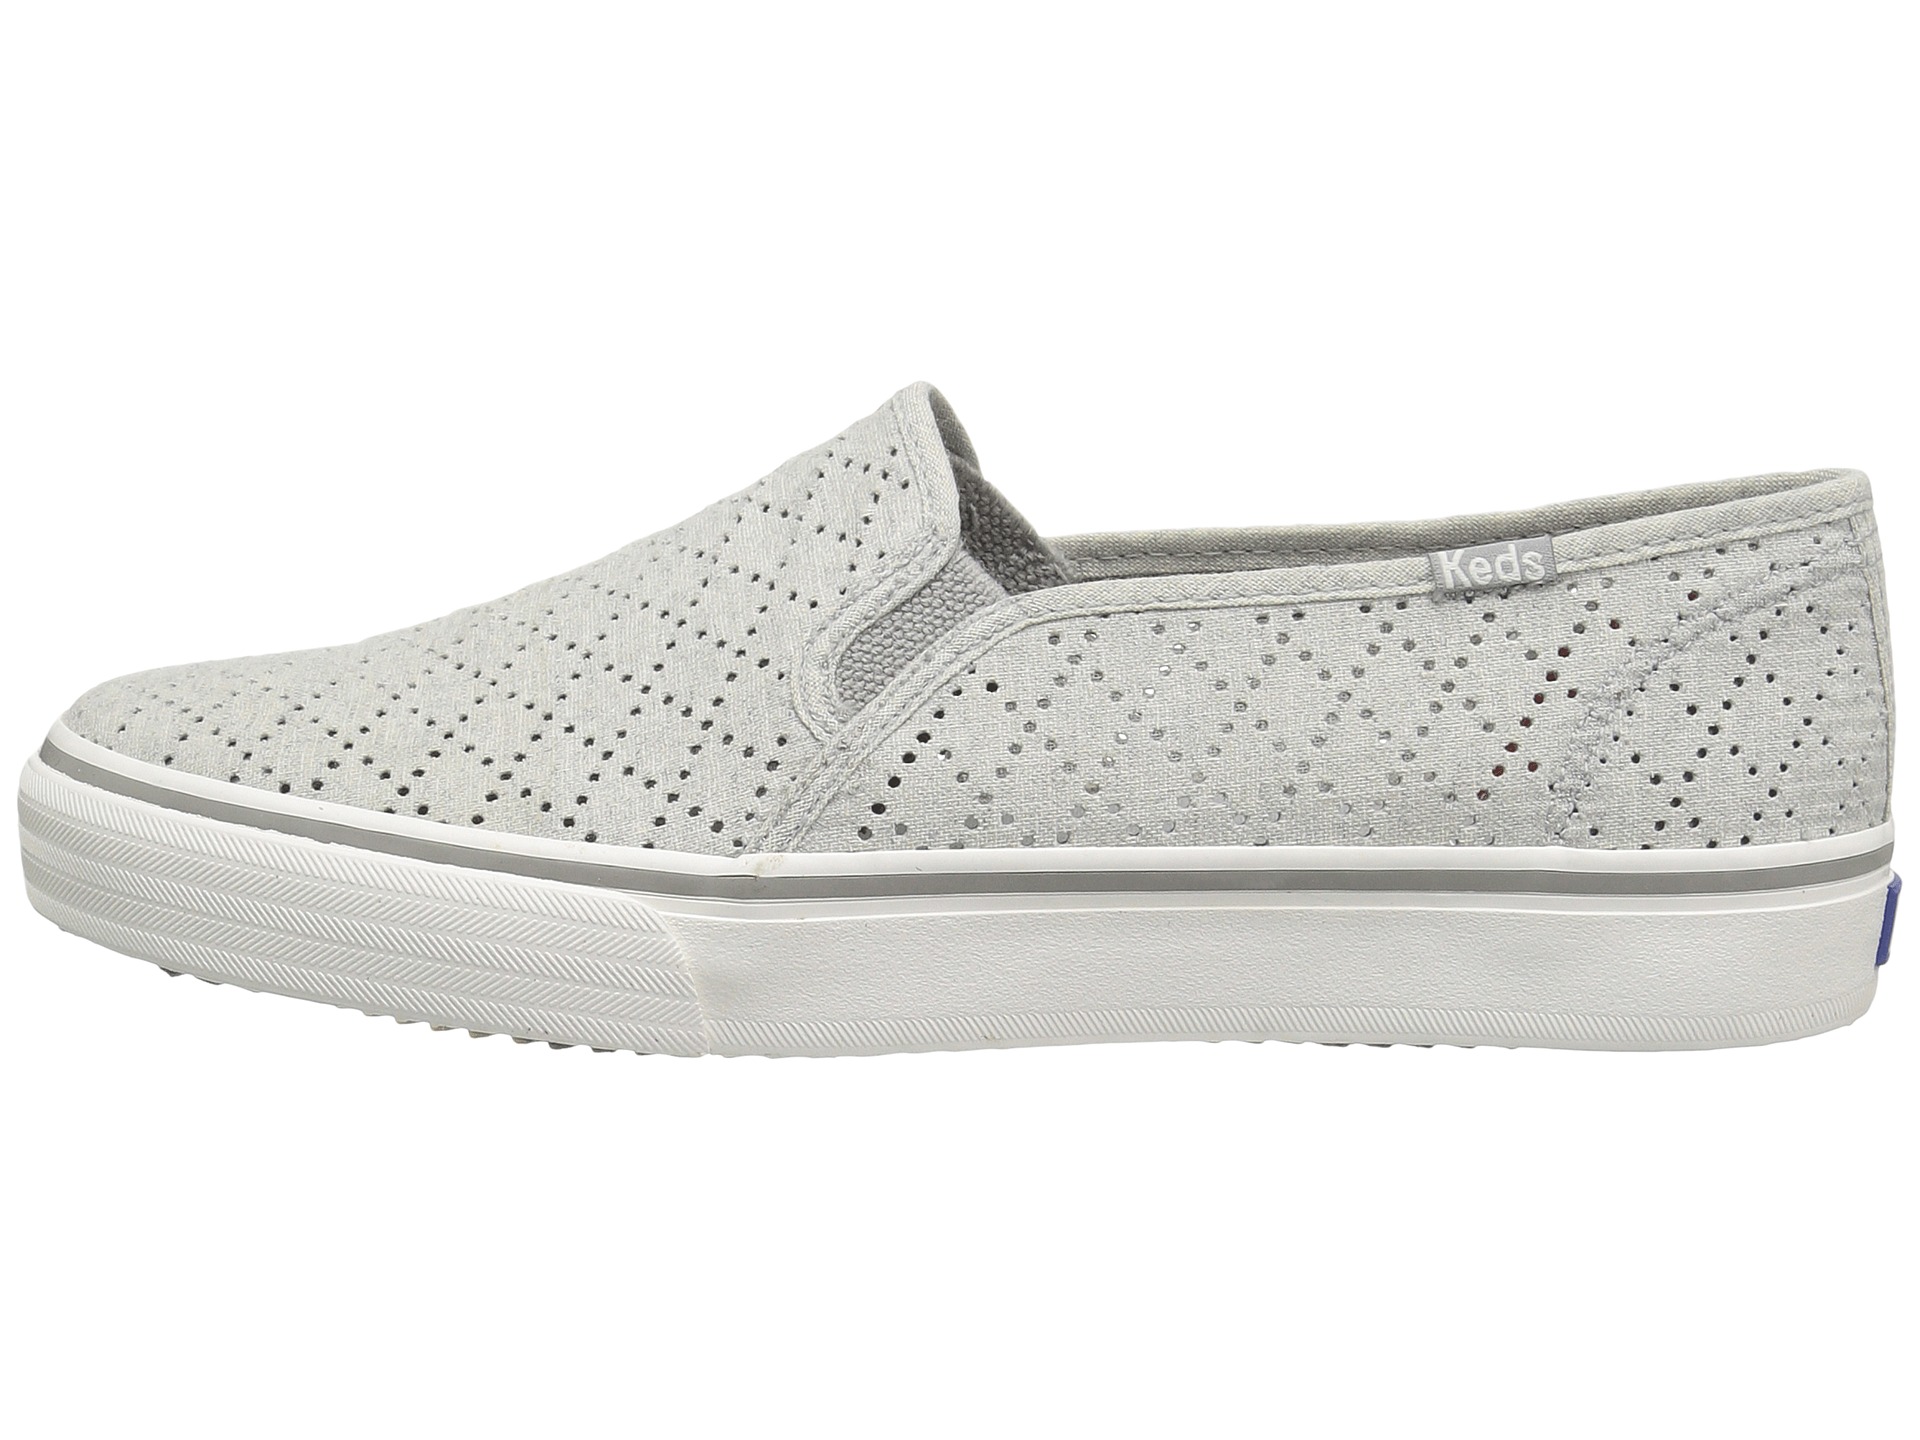 Keds Double Decker Perforated Canvas at Zappos.com